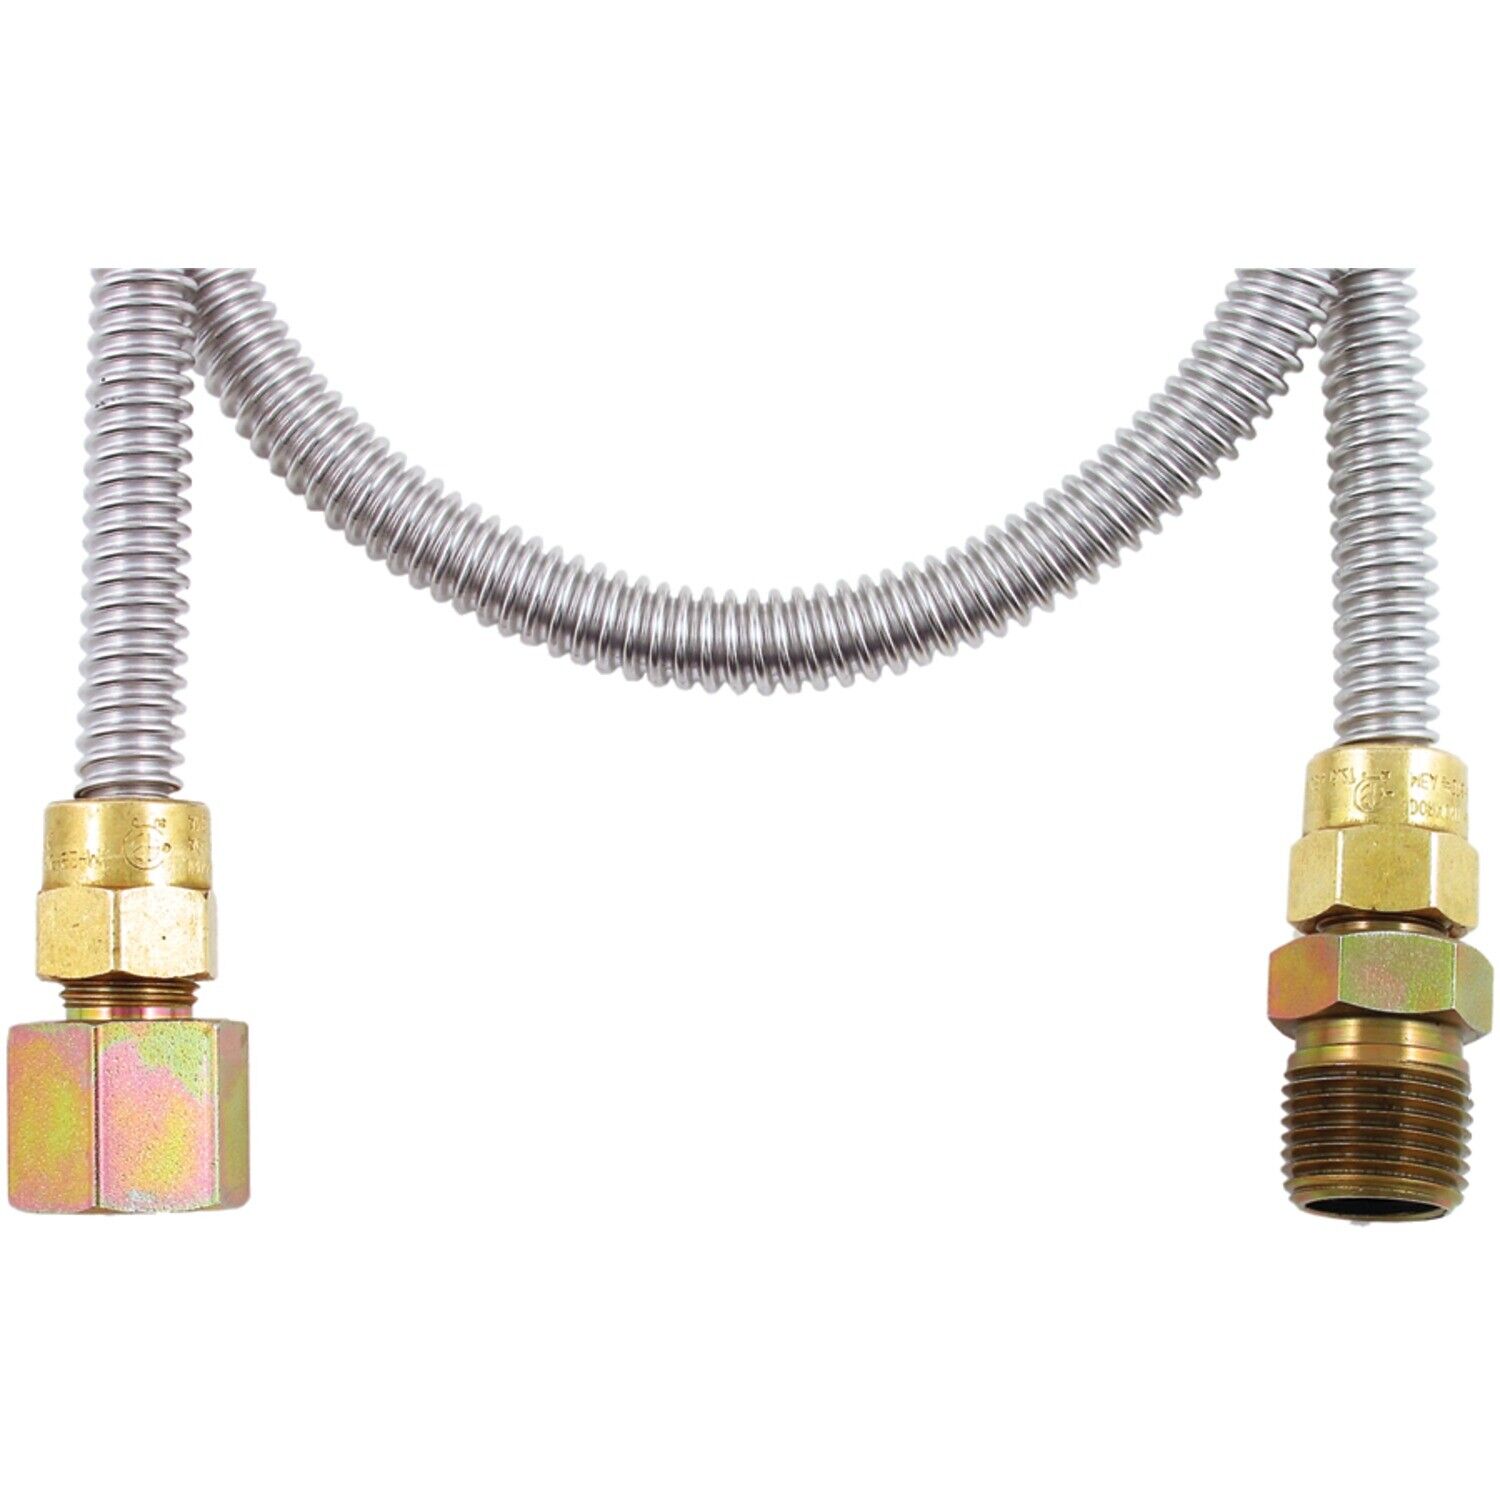 Silver Gas Flex-Line for Dryers & Water Heaters